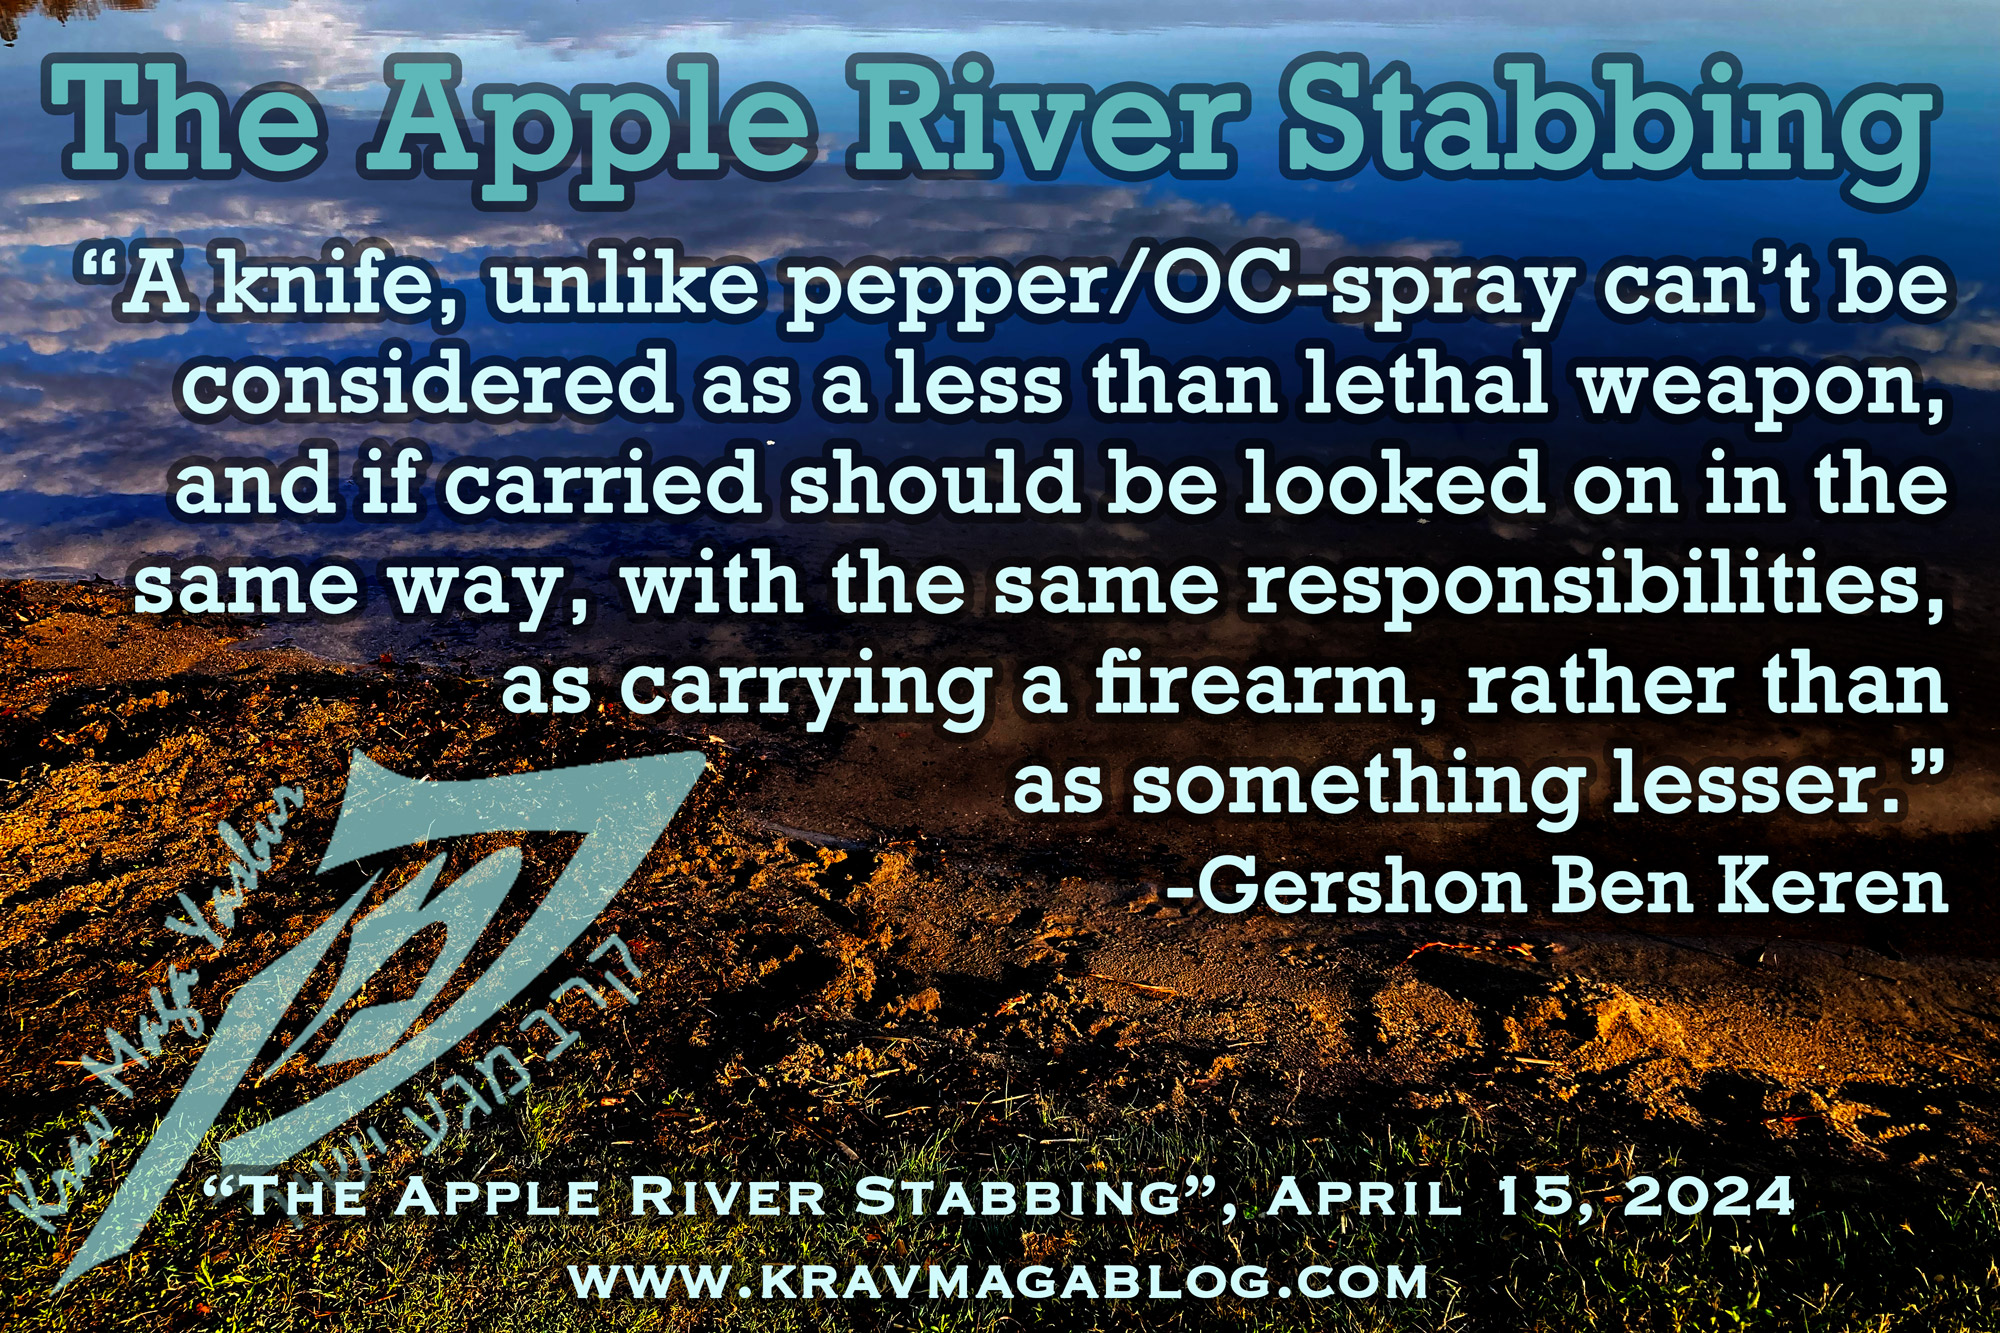 Blog About The Apple River Stabbing